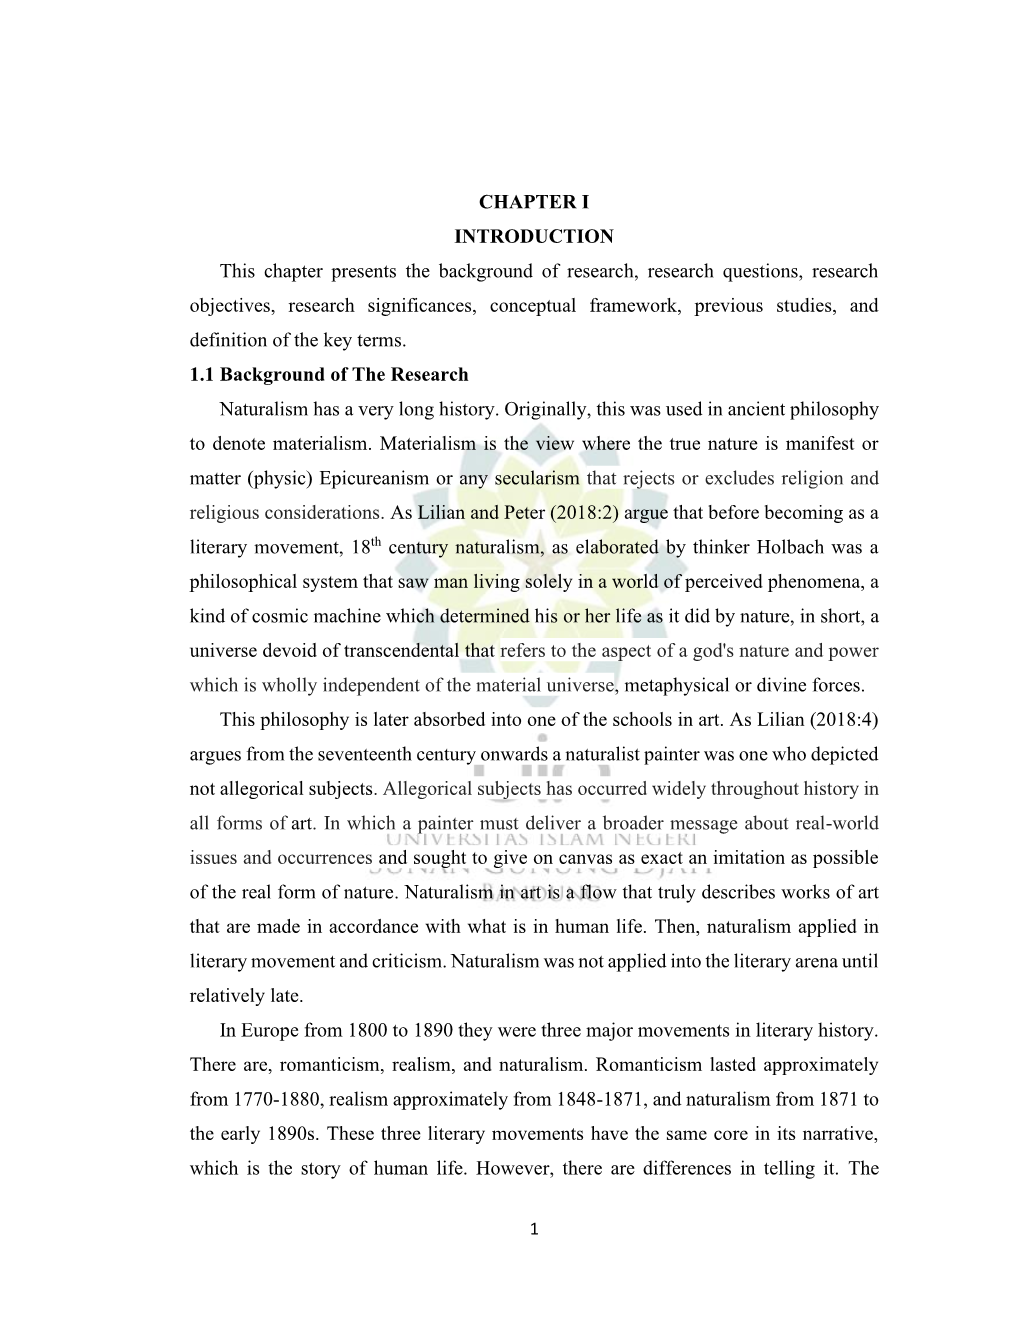 CHAPTER I INTRODUCTION This Chapter Presents the Background Of